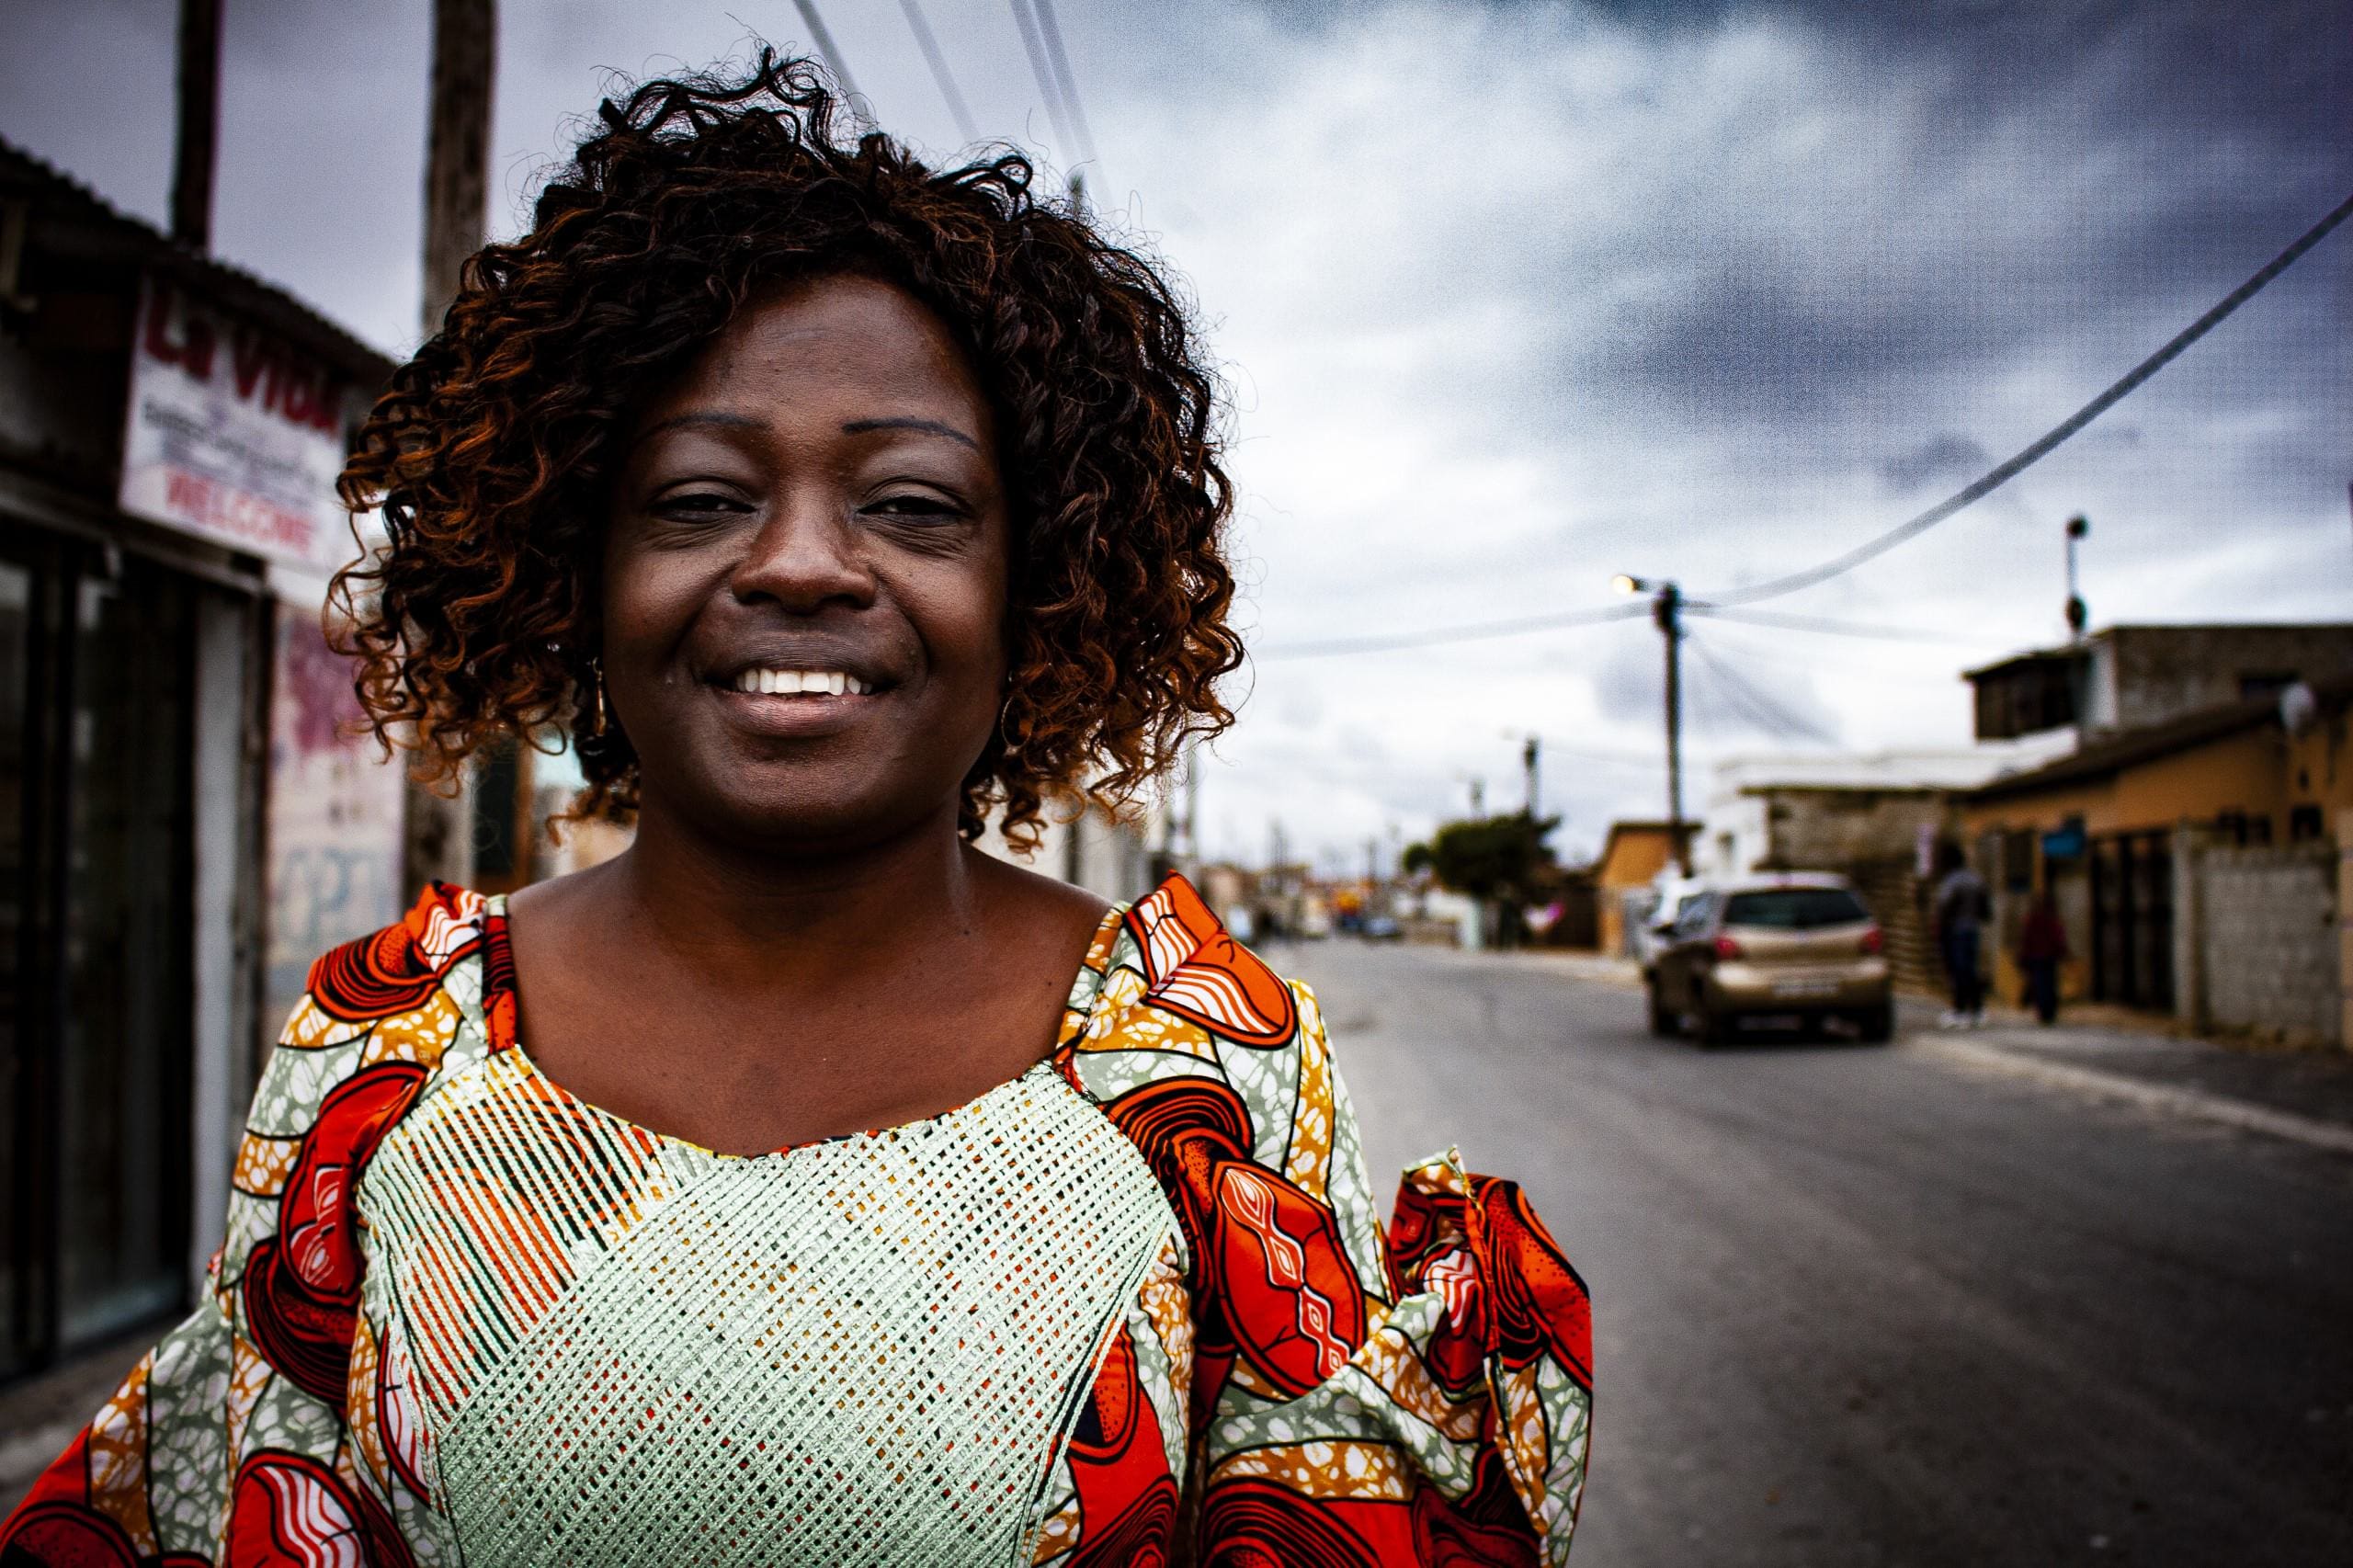 Therese in her neighbourhood, Delft, Cape Town. Suggested Credit Quentin Pichon/ Scalabrini